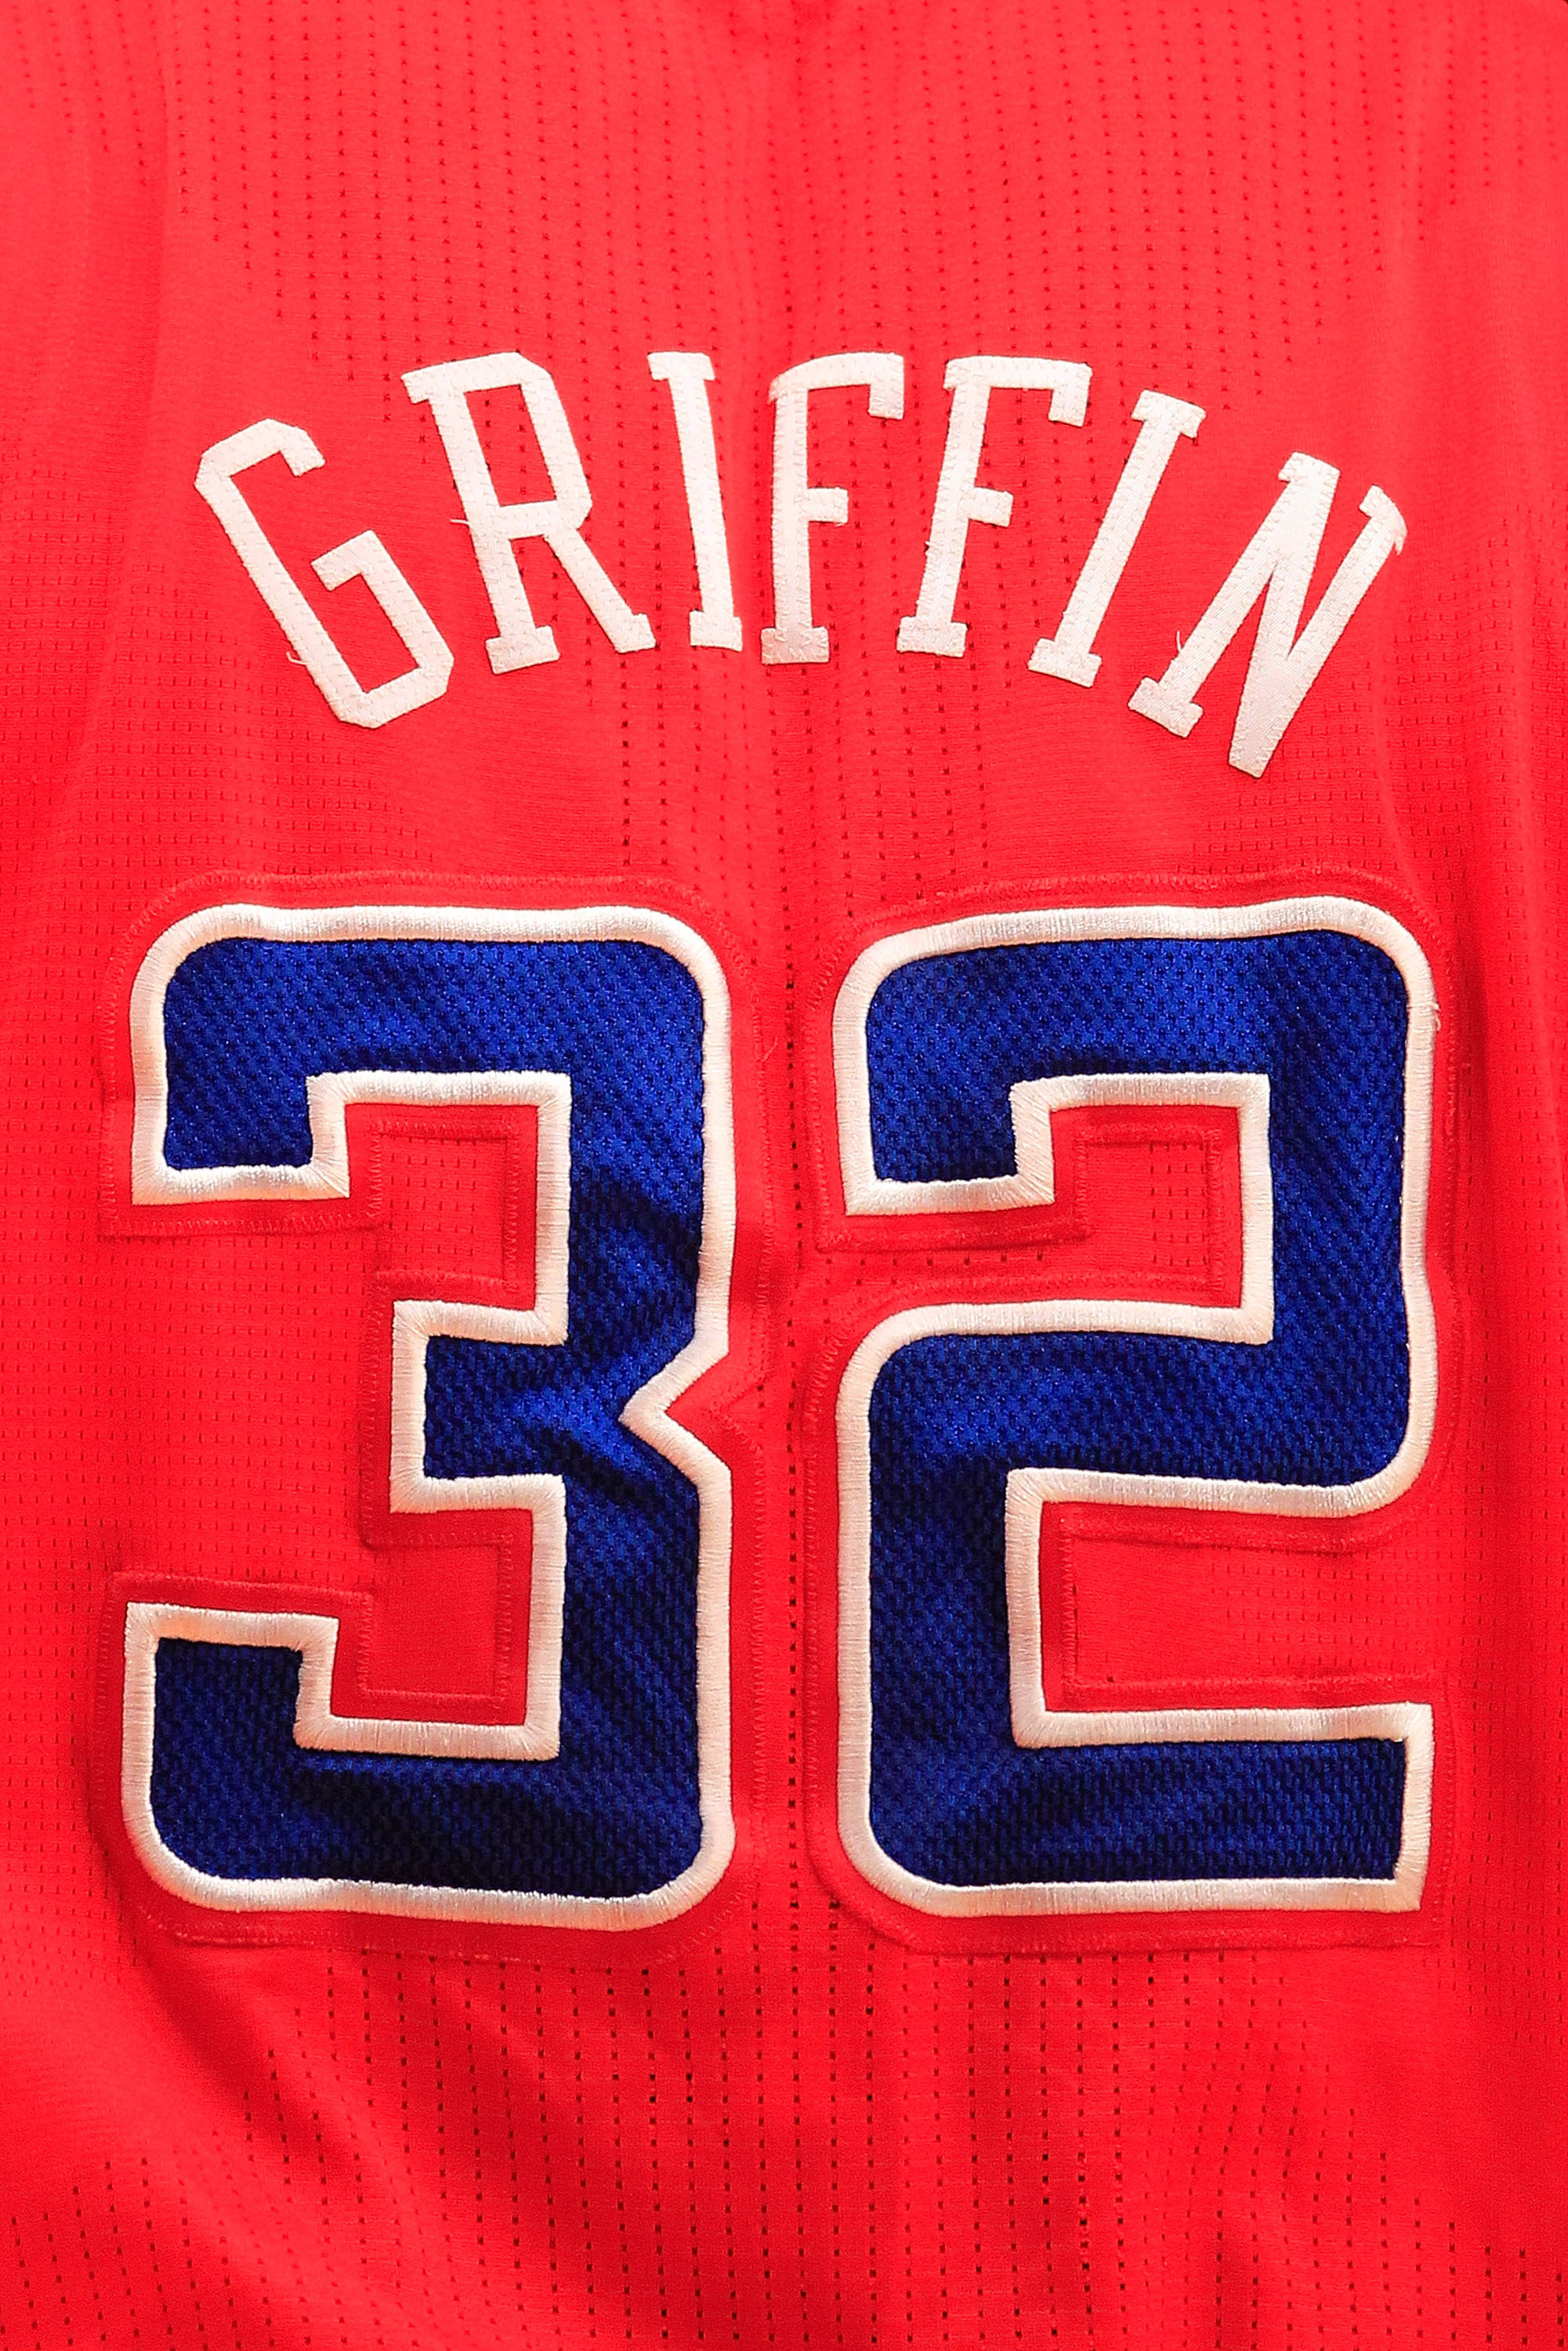 NEW YORK, NY - FEBRUARY 09:  A detailed view of the jersey worn by Blake Griffin #32 of the Los Angeles Clippers during the game against the New York Knicks at Madison Square Garden on February 9, 2011 in New York City. NOTE TO USER: User expressly acknow